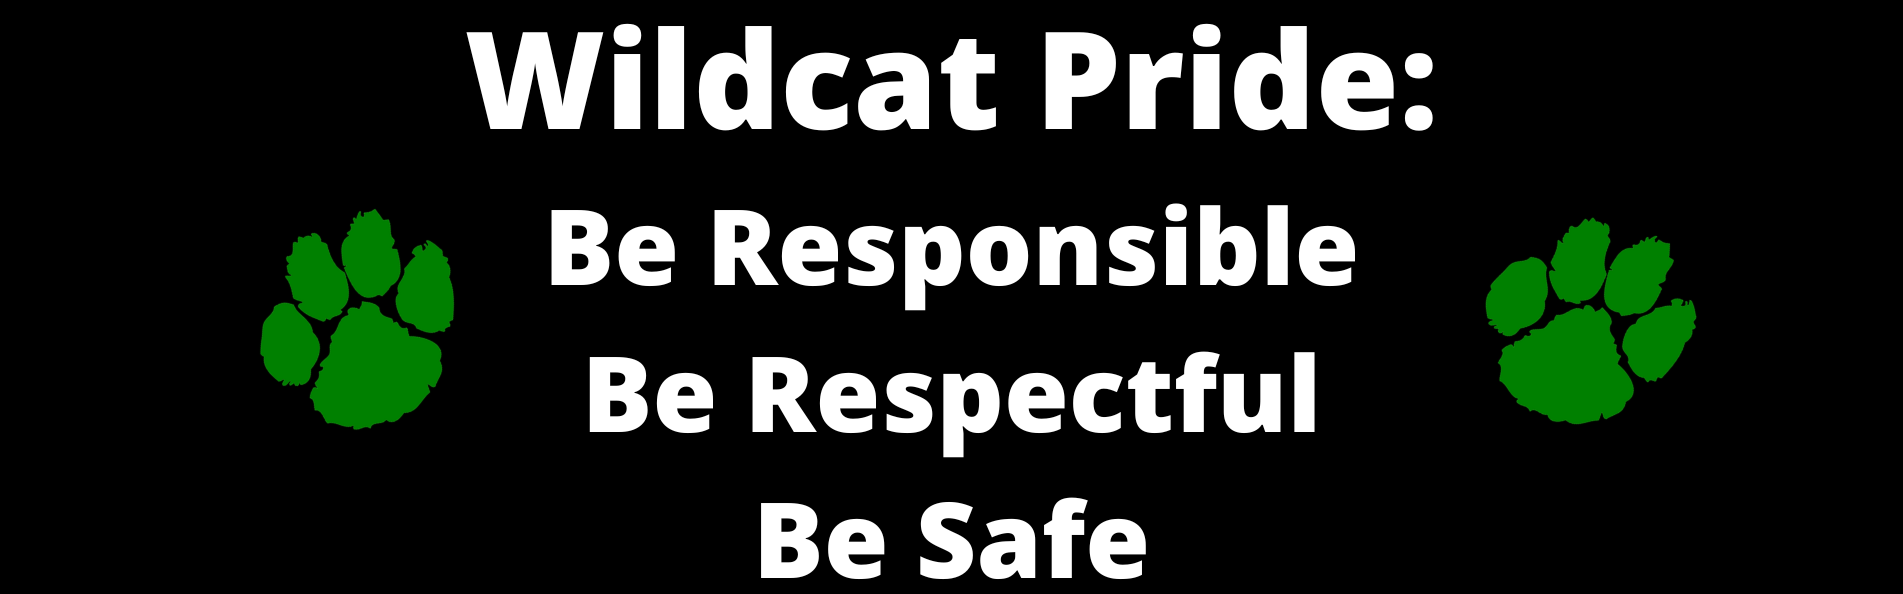 Wildcat Pride: Be Responsible, Be Respectful, Be Safe. White font, black background, two green pawprints